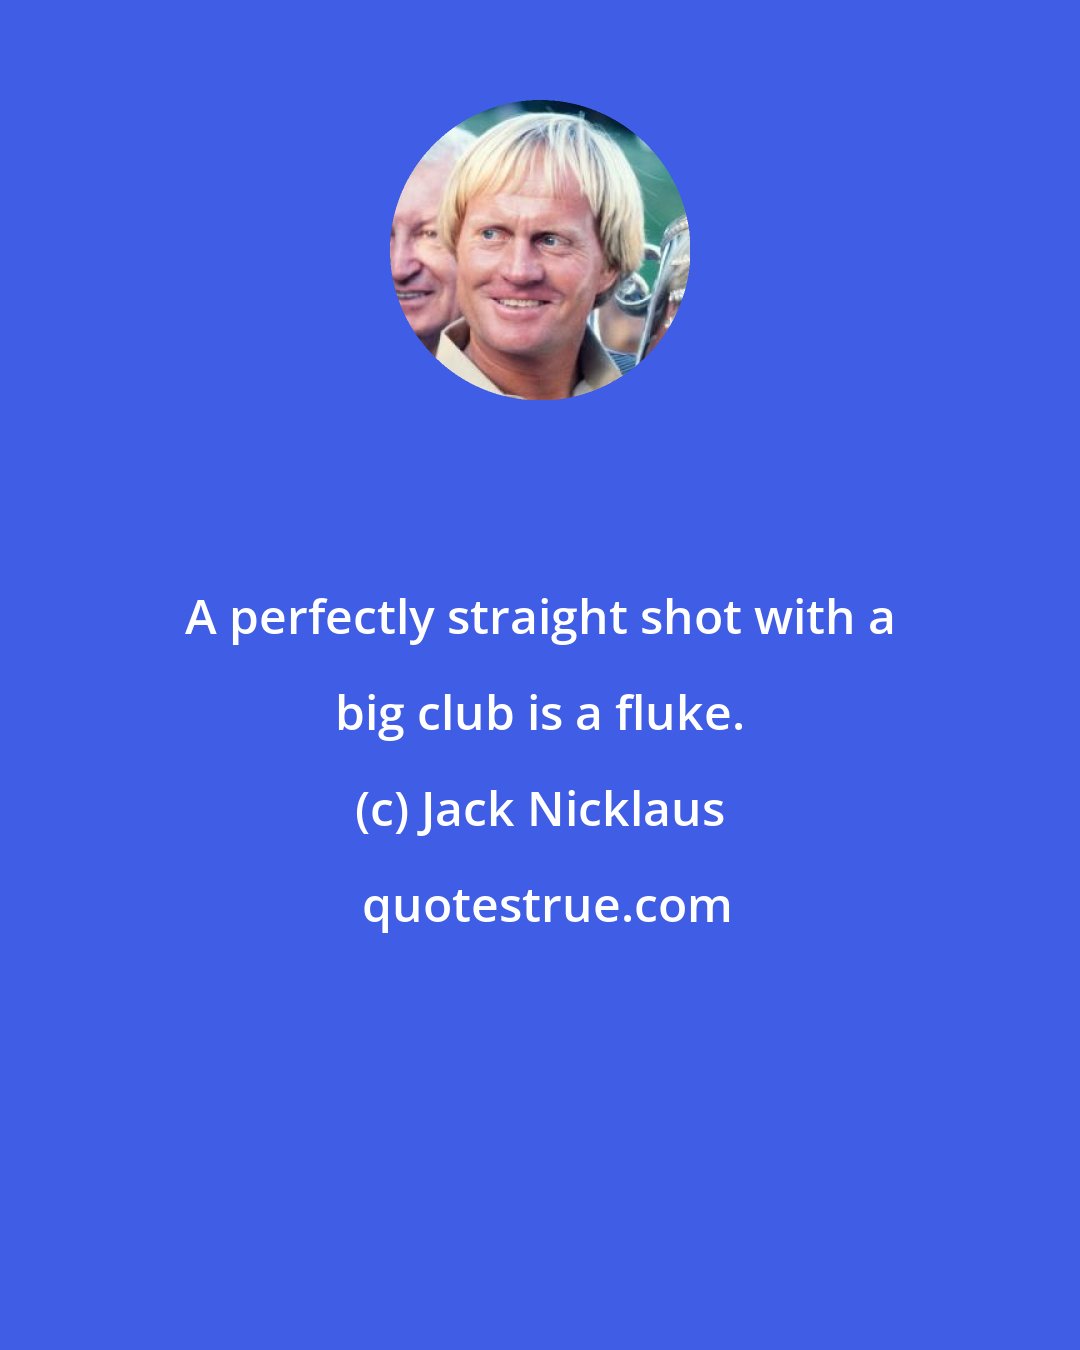 Jack Nicklaus: A perfectly straight shot with a big club is a fluke.